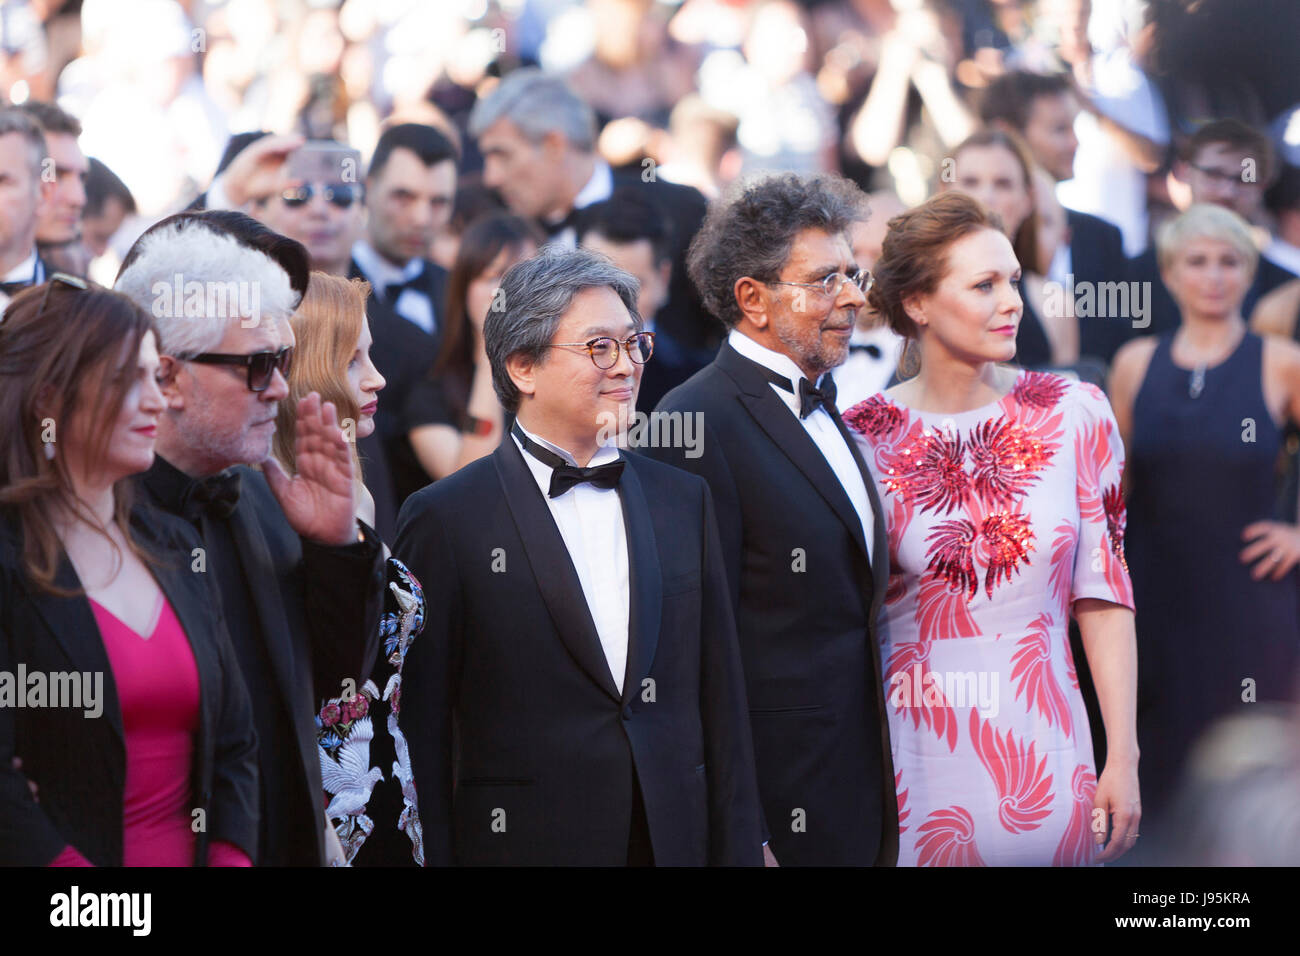 CANNES, FRANCE - MAY 17: (L-R) Jury members Agnes Jaoui, Jessica Chastain, Will Smith, President of the jury Pedro Almodovar and jury members Park Chan-wook, Gabriel Yared, and Fan Bingbing attend the 'Ismael's Ghosts (Les Fantomes d'Ismael)' screening and Opening Gala during the 70th annual Cannes Film Festival at Palais des Festivals on May 17,2017 in Cannes. France. Laurent Koffel/Alamy Live News Stock Photo